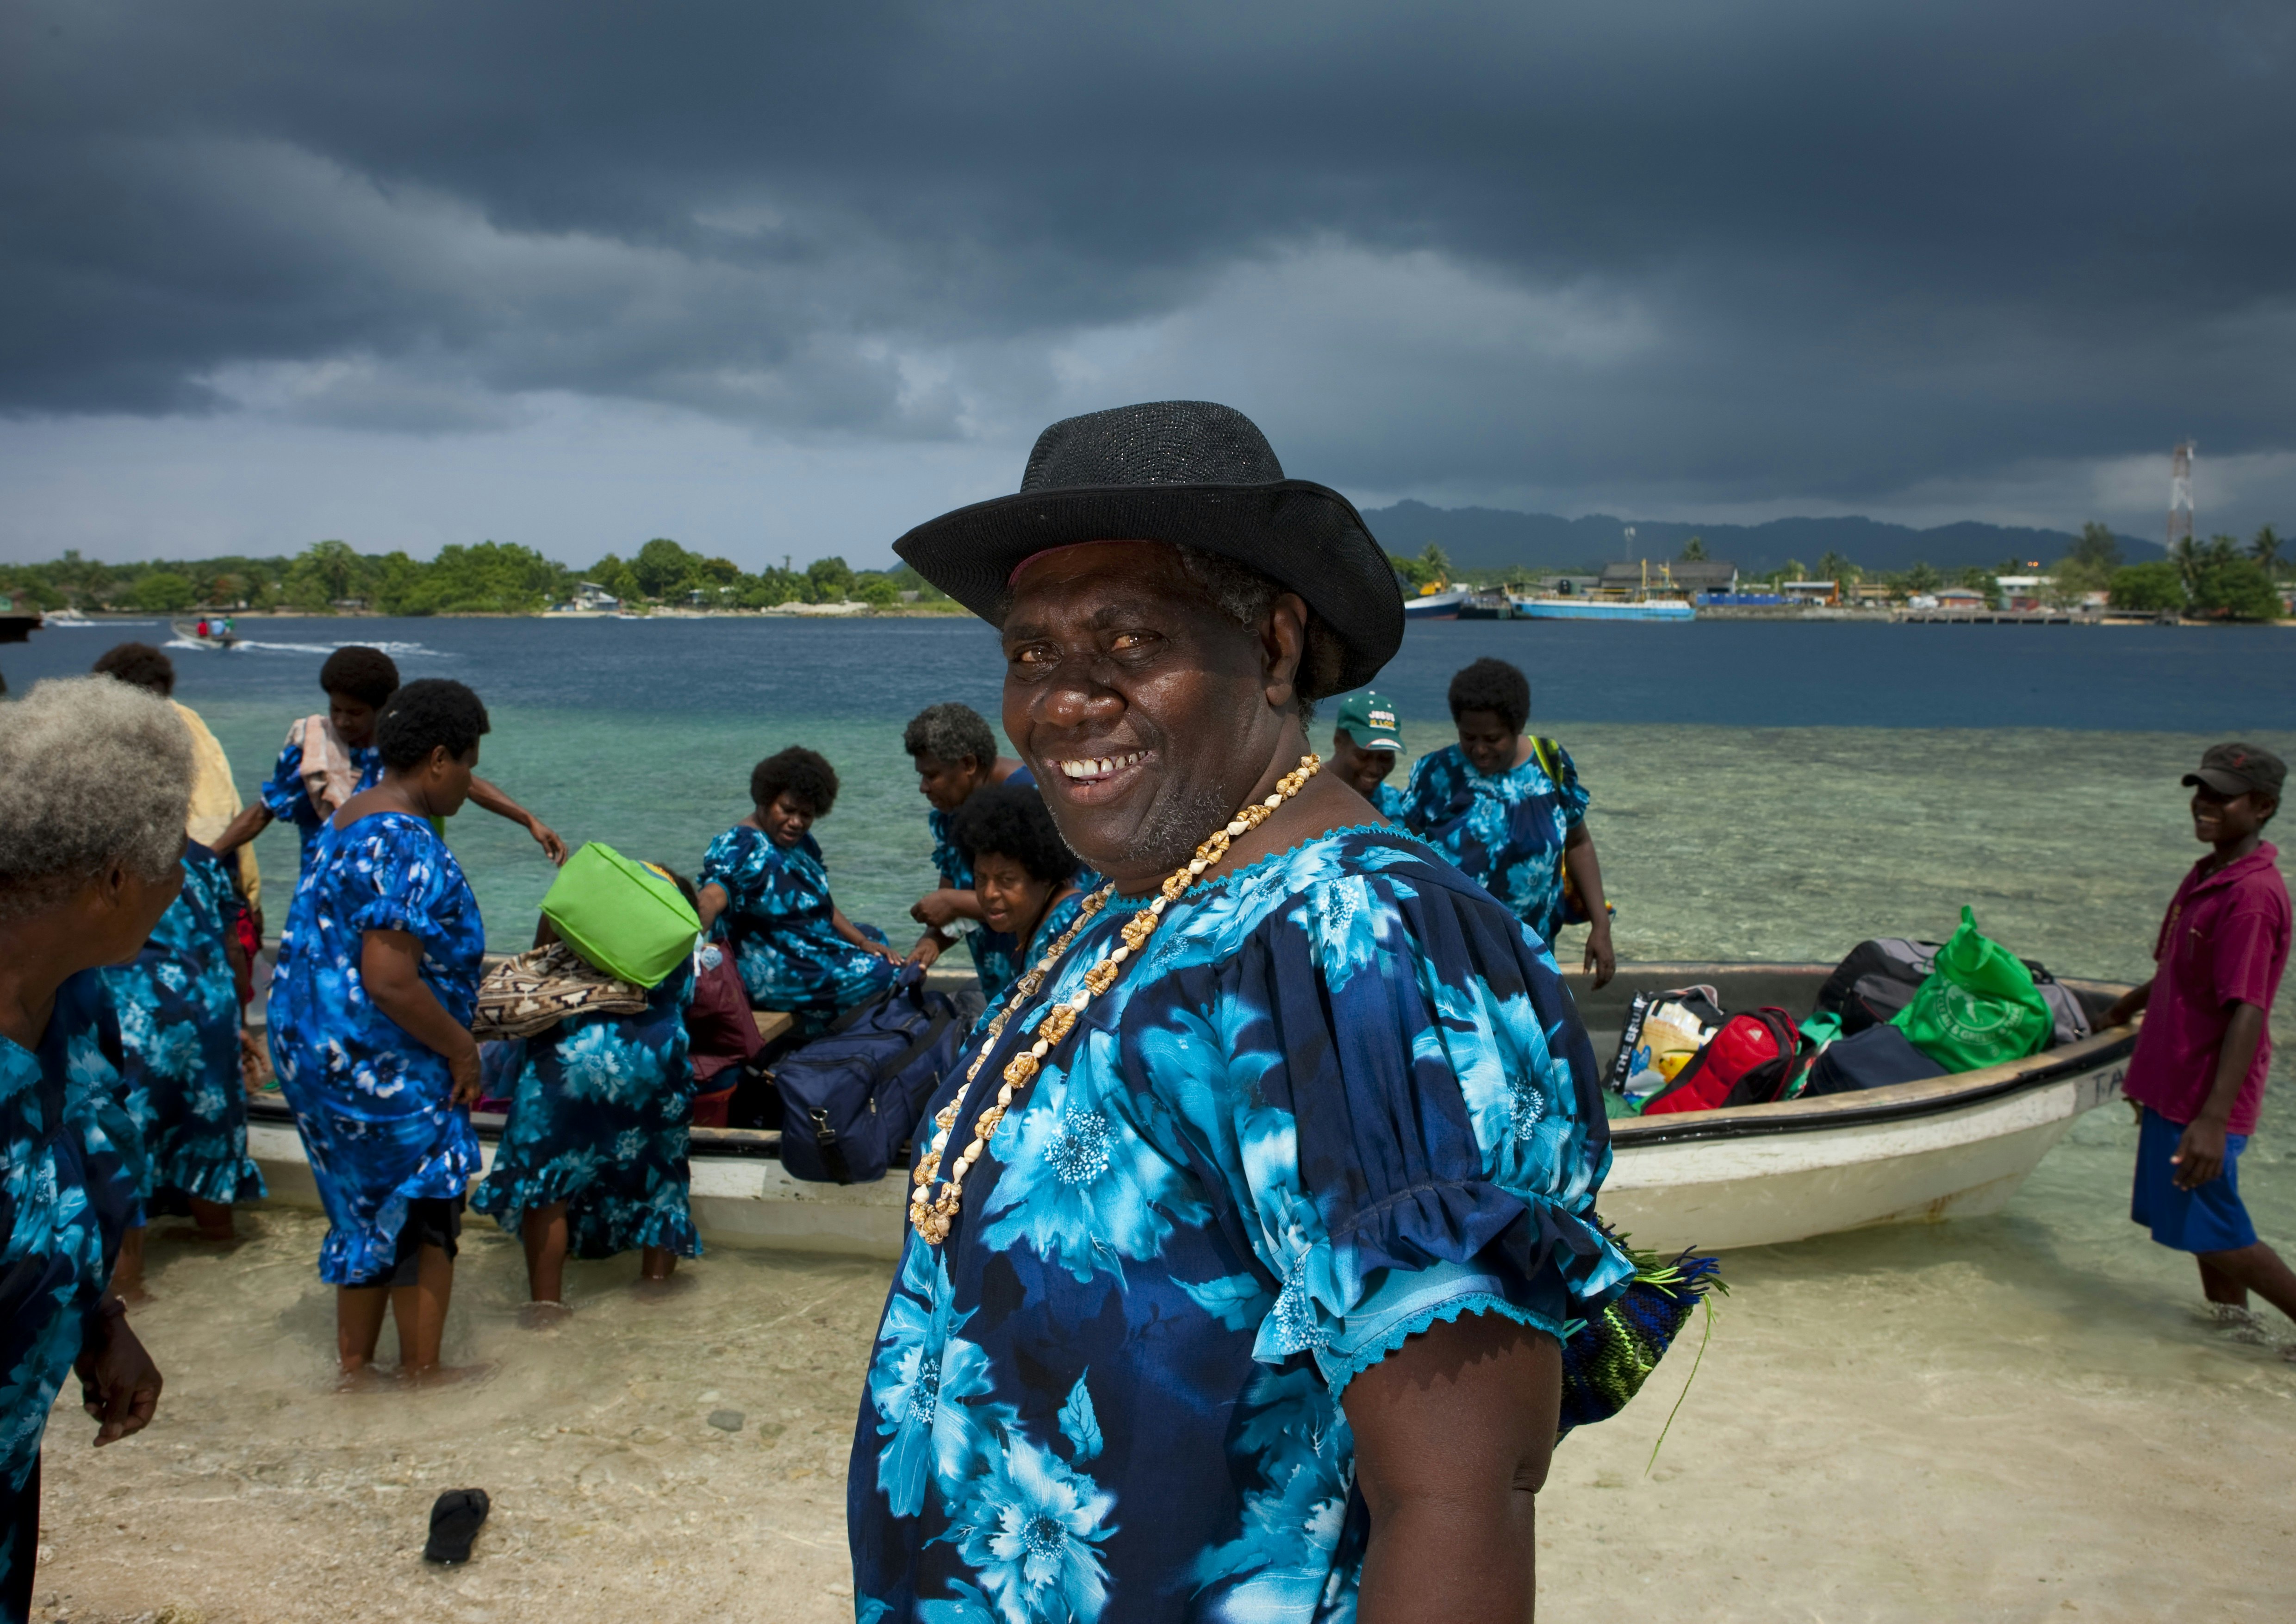 Beach scene in Bougainville with men and women in colourful shirts getting into boats